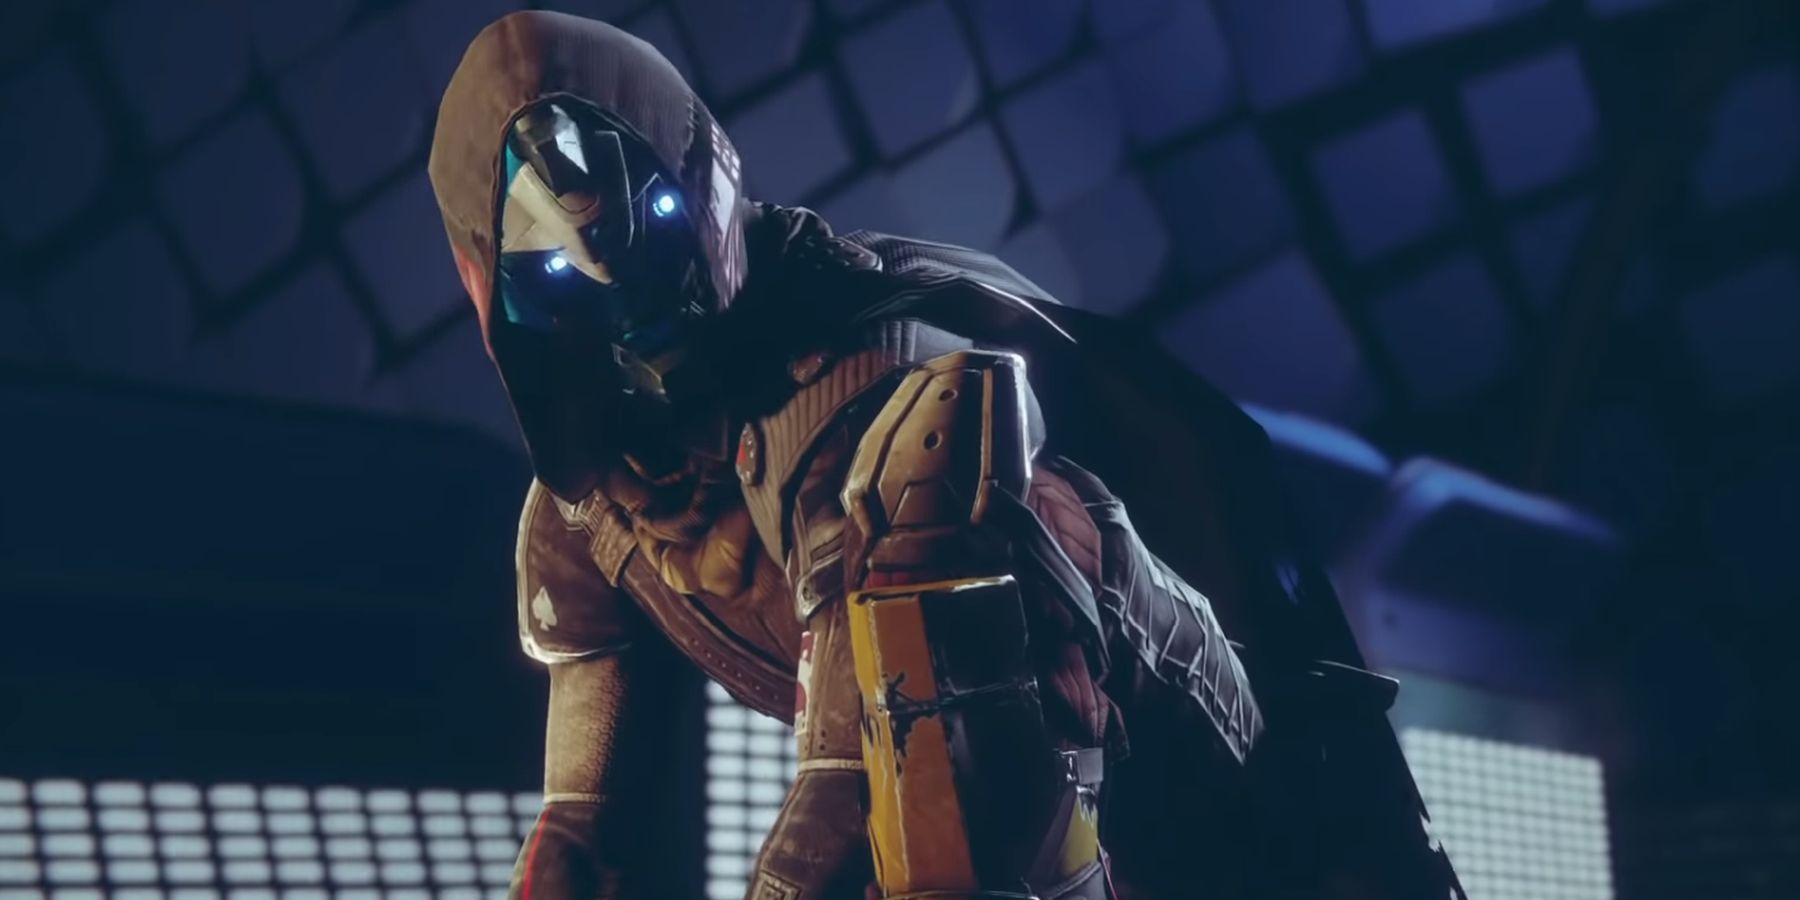 An Exo from Destiny 2 leaning left and looking at the camera.